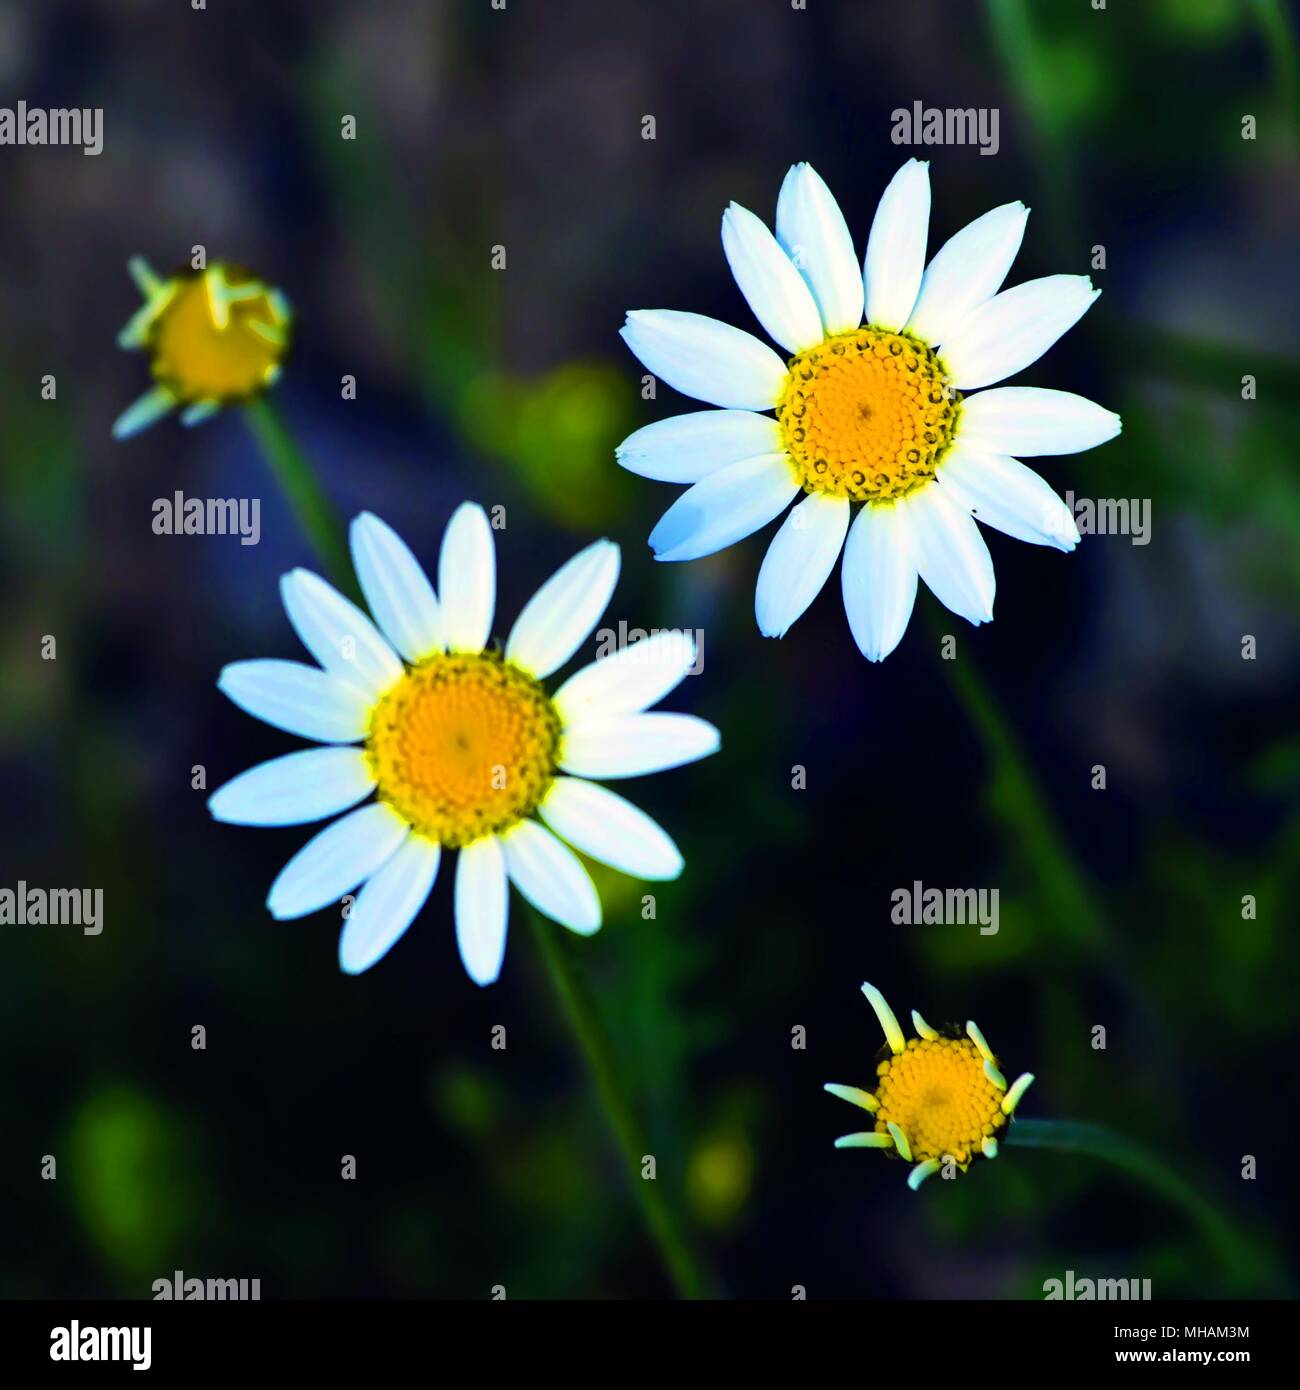 2 white Matricaria (German chamomile) flowers with blurred background and square composition Stock Photo